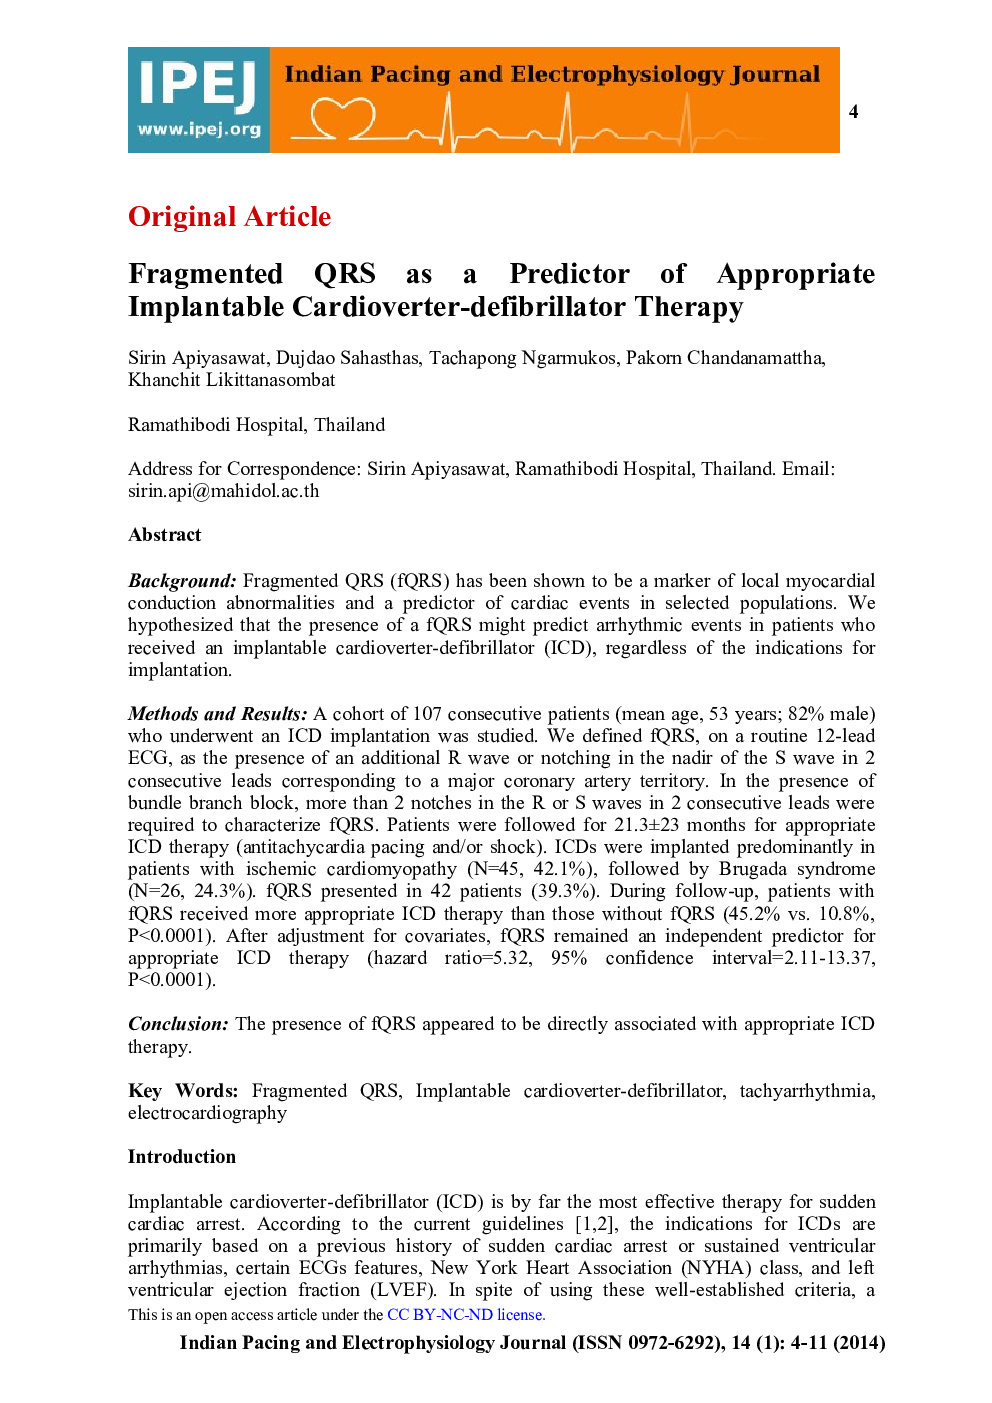 Fragmented QRS as a Predictor of Appropriate Implantable Cardioverter-defibrillator Therapy